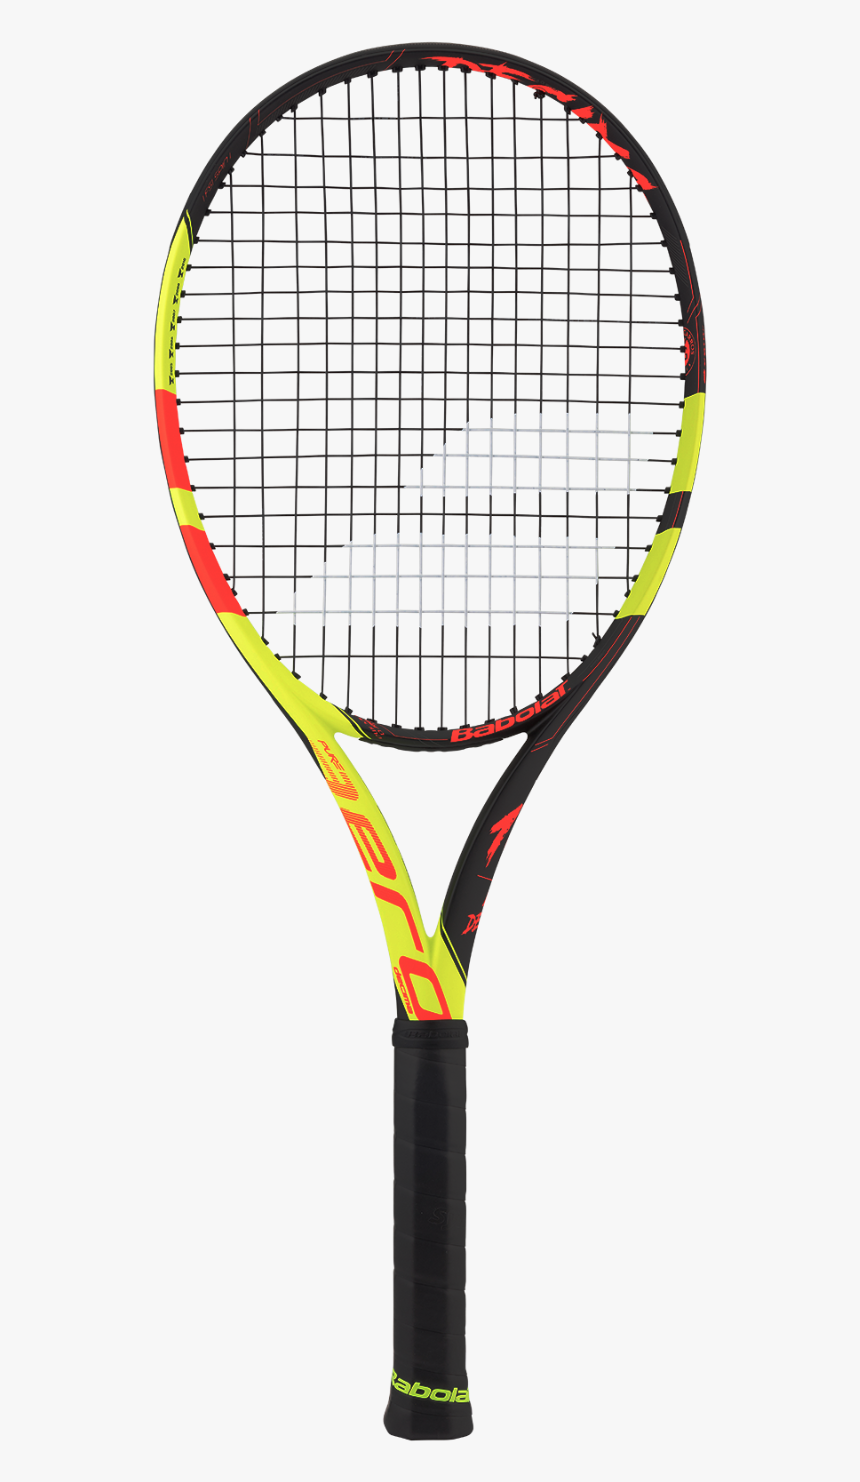 Babolat Tennis Rackets Size 27, HD Png Download, Free Download